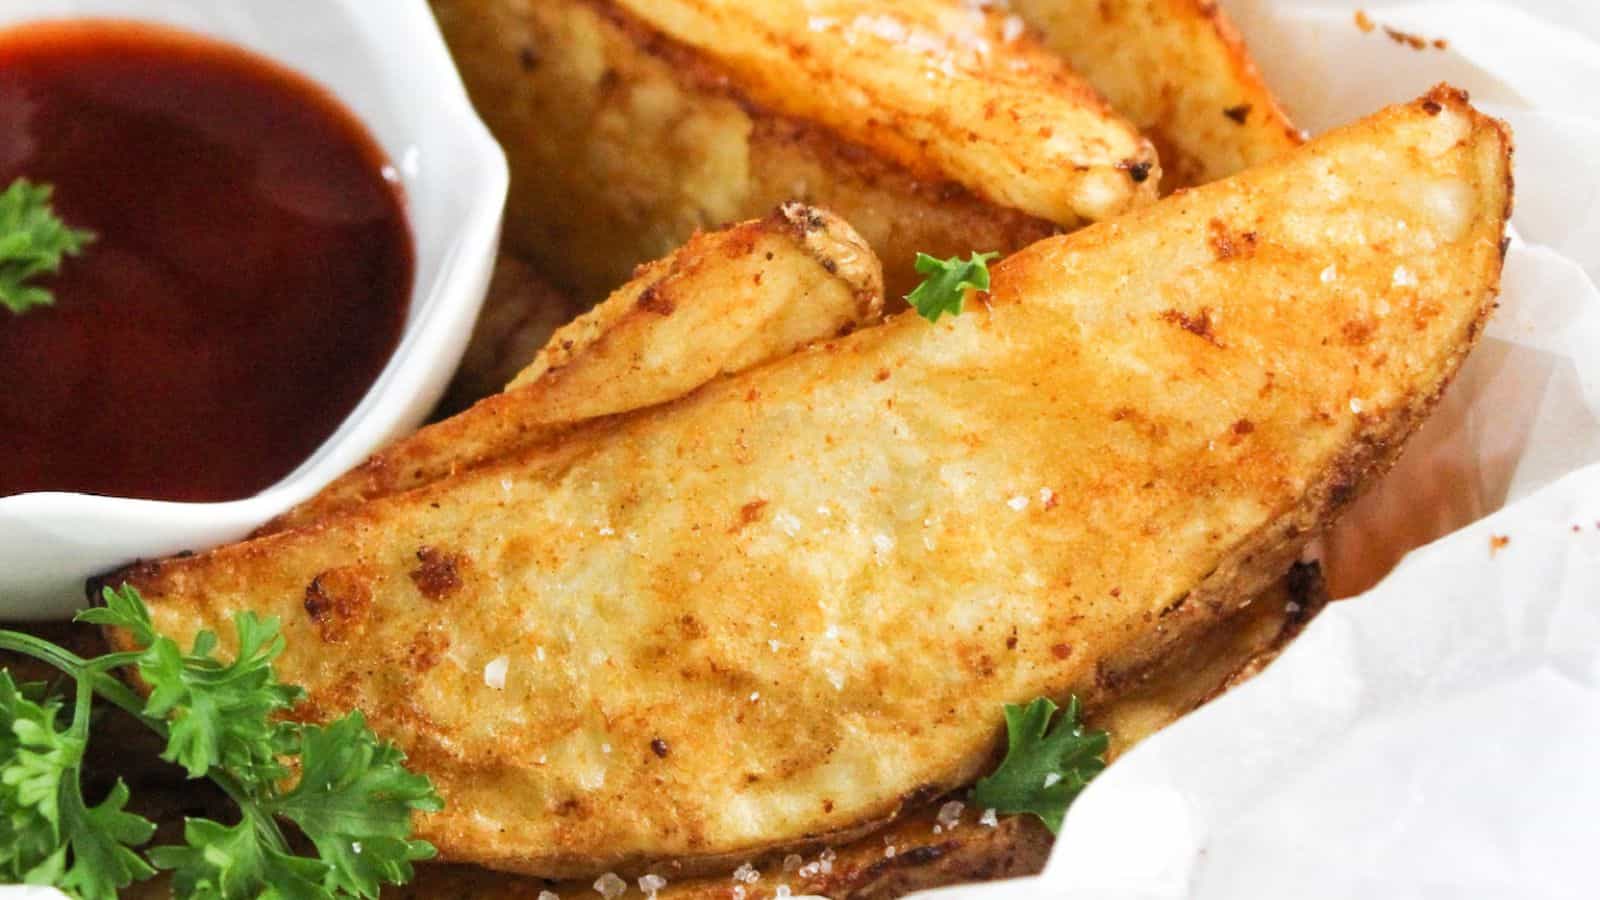 Fried potato wedges with ketchup and parsley.